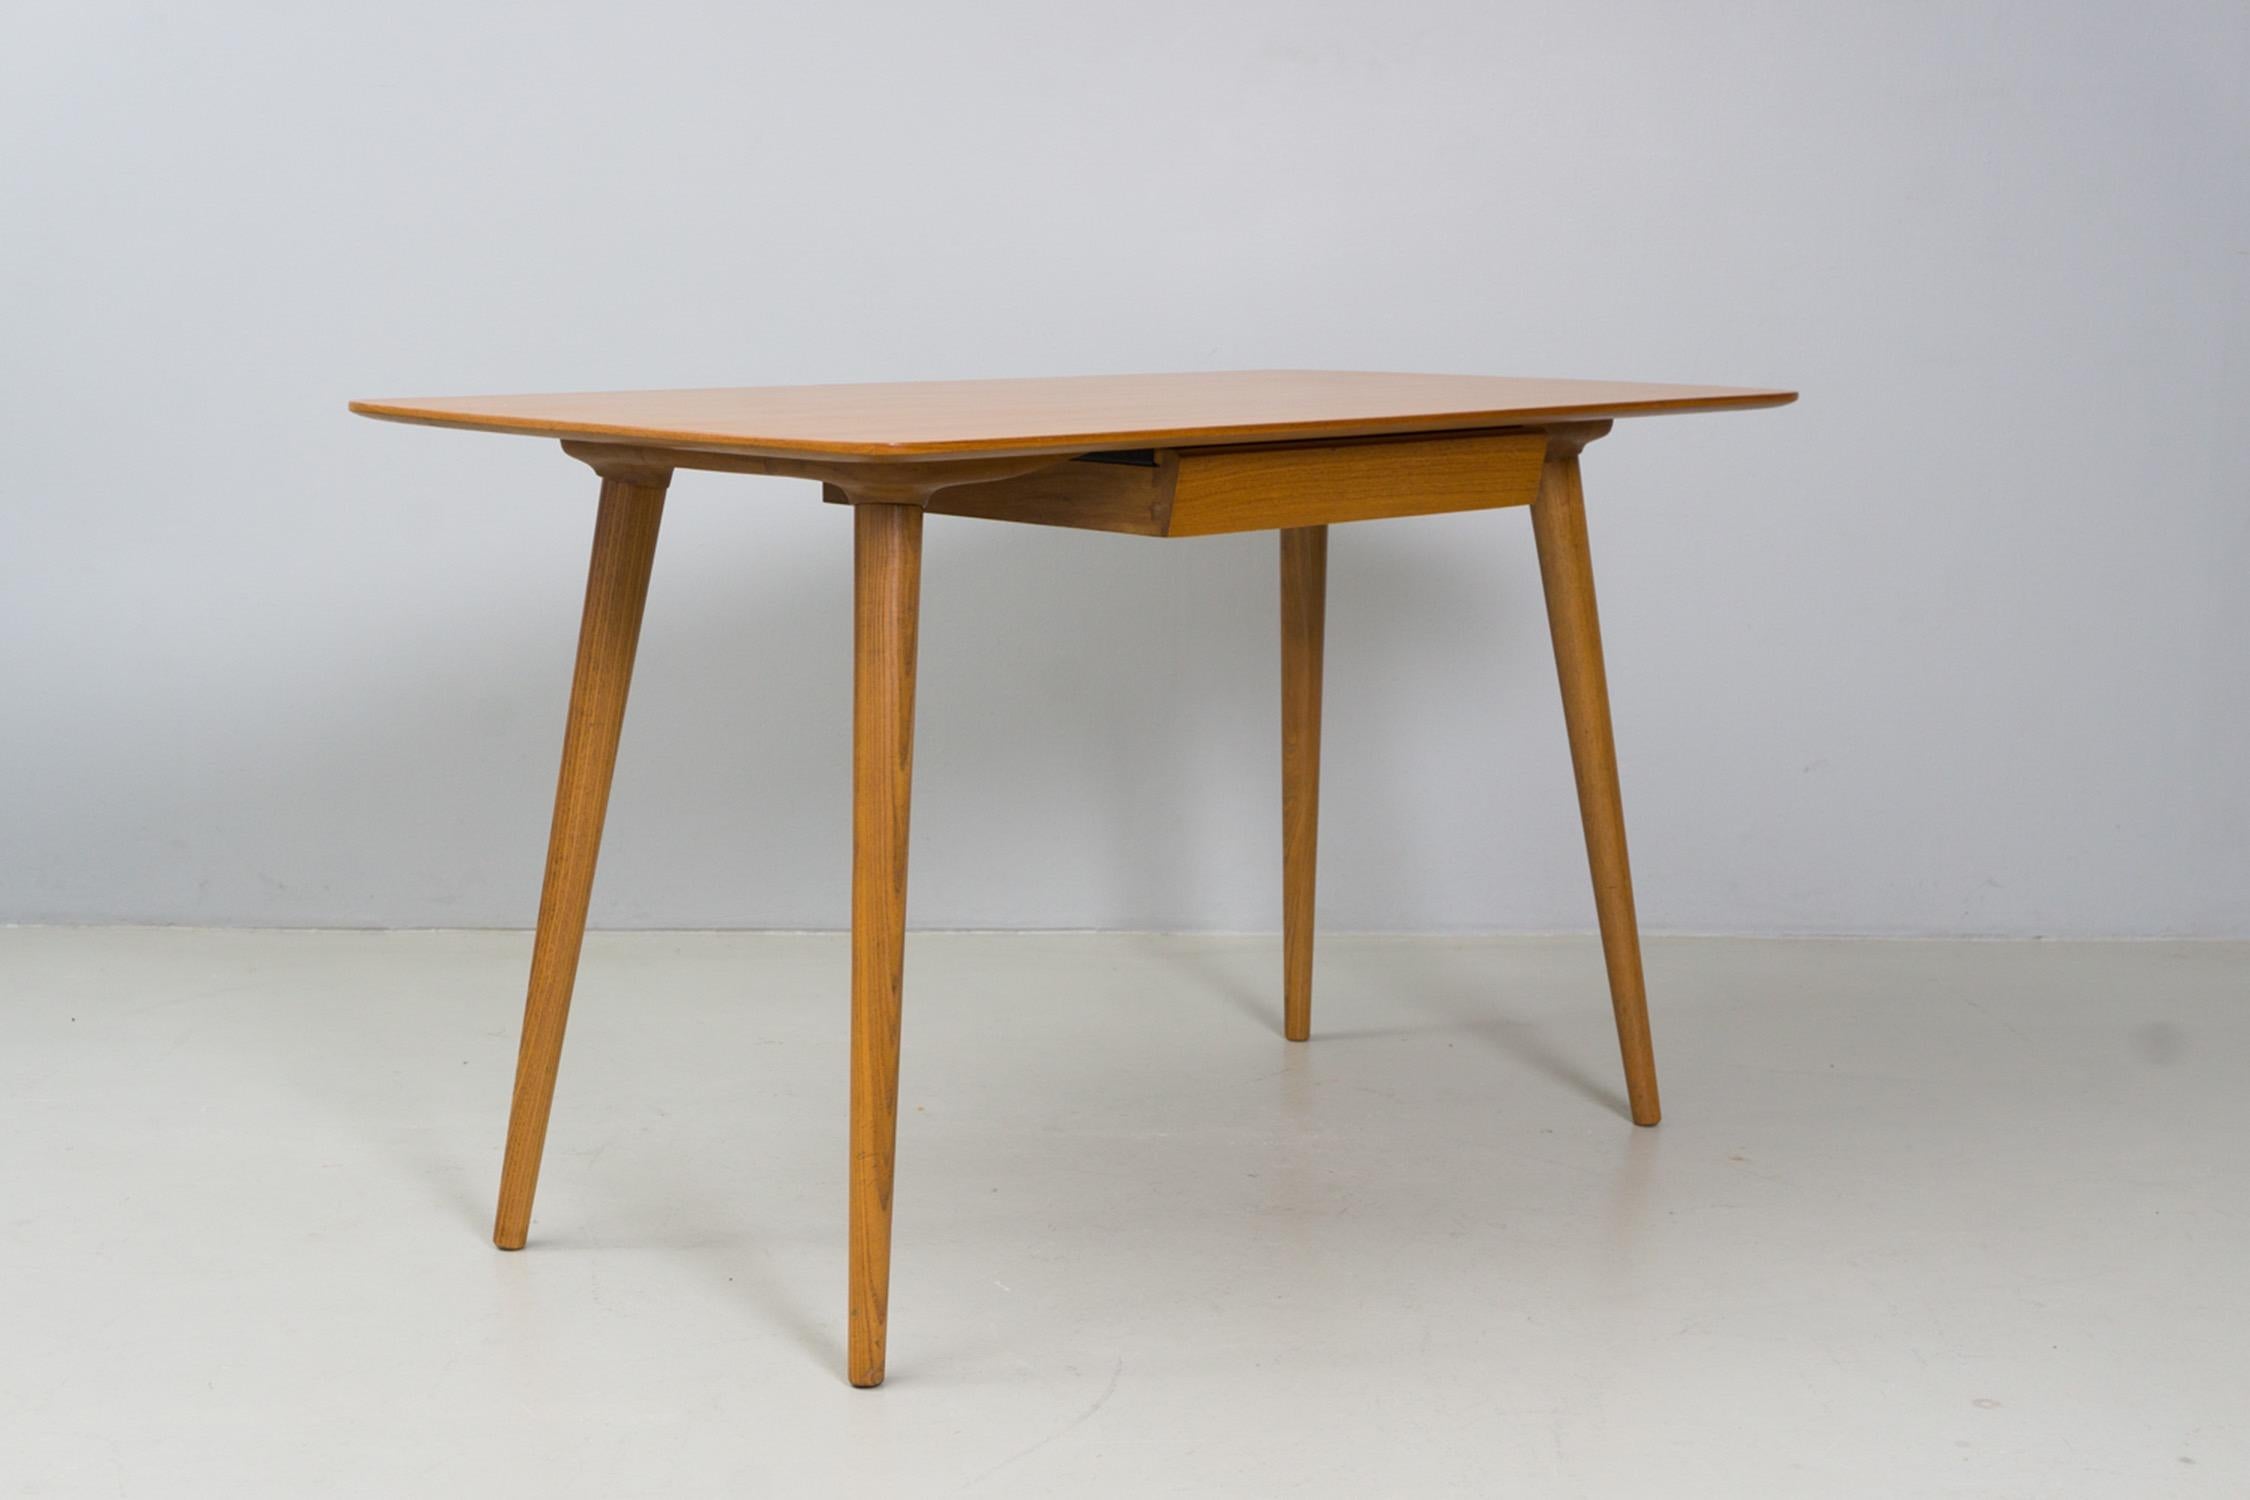 Minimal and elegant desk with drawer. Solid wood construction, take top made of solid elm wood, legs with wooden screw thread. Exhibited at Trienale Milano 1954. 


Osvaldo Borsani was born in 1911 in Italy. He studied architecture at the